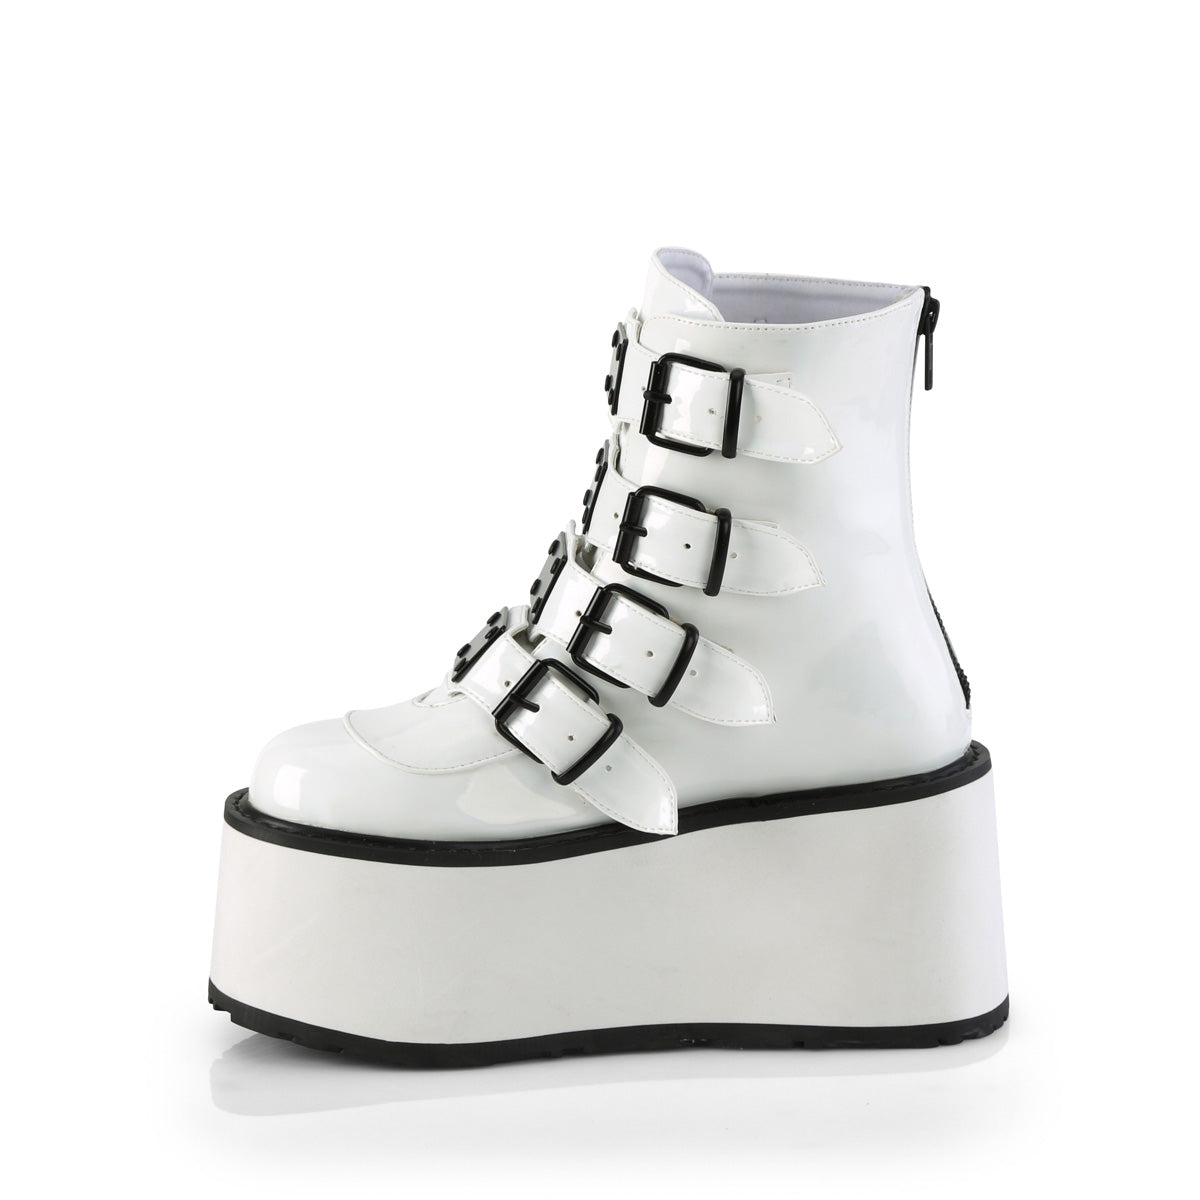 DAMNED-105 Demonia White Holo Patent Women's Ankle Boots [Demonia Cult Alternative Footwear]